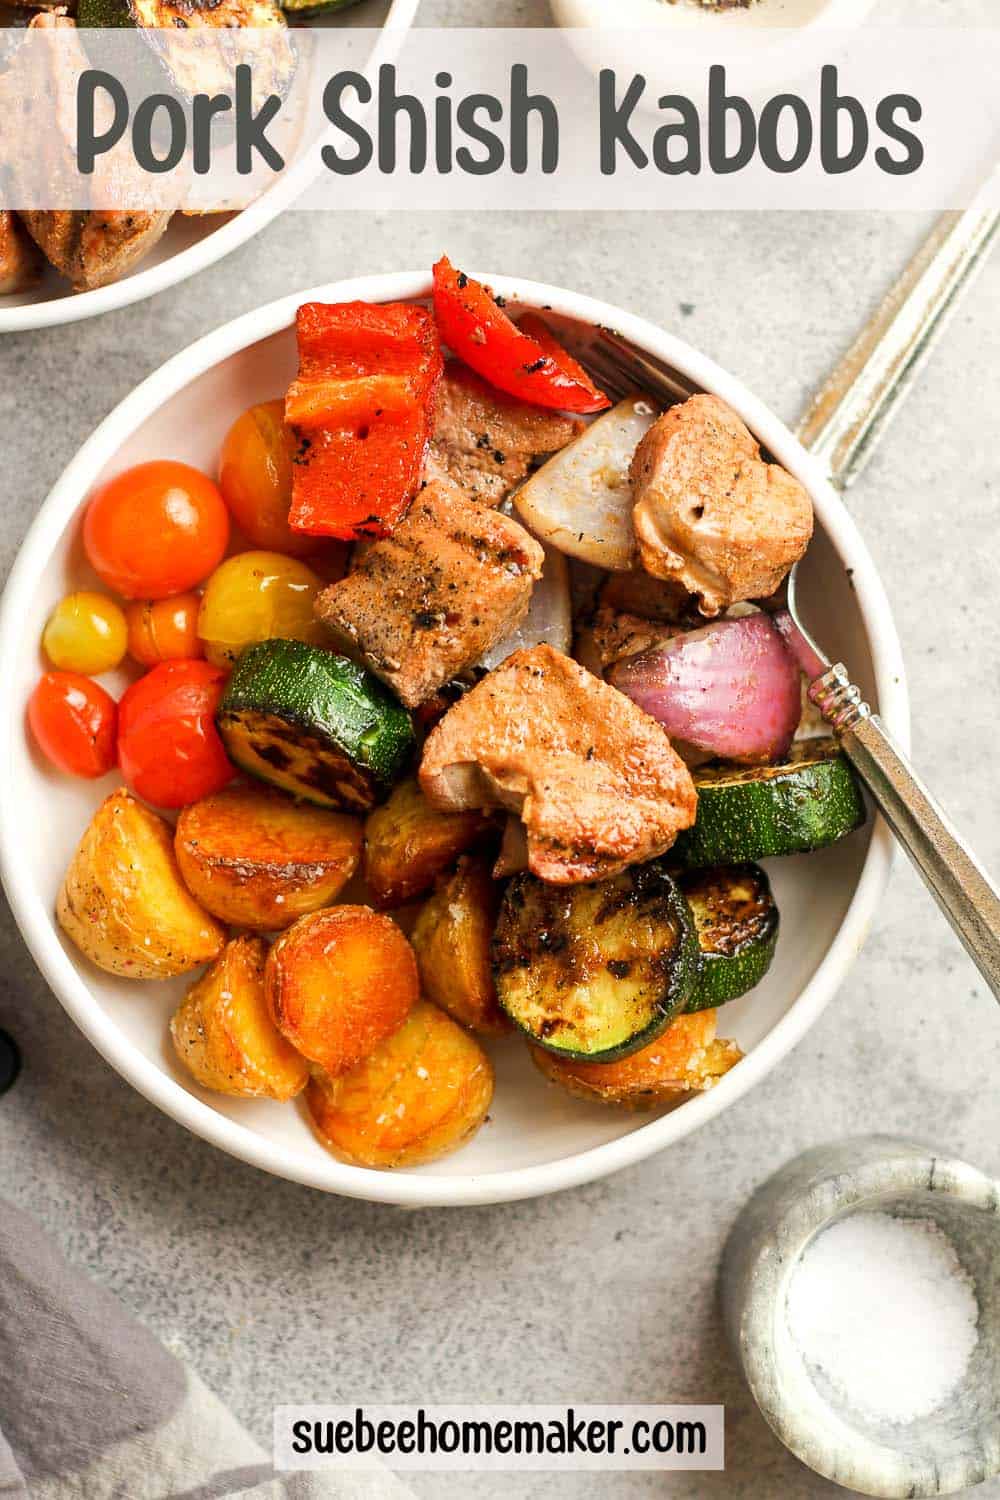 A bowl of pork shish kabobs with grilled potatoes.